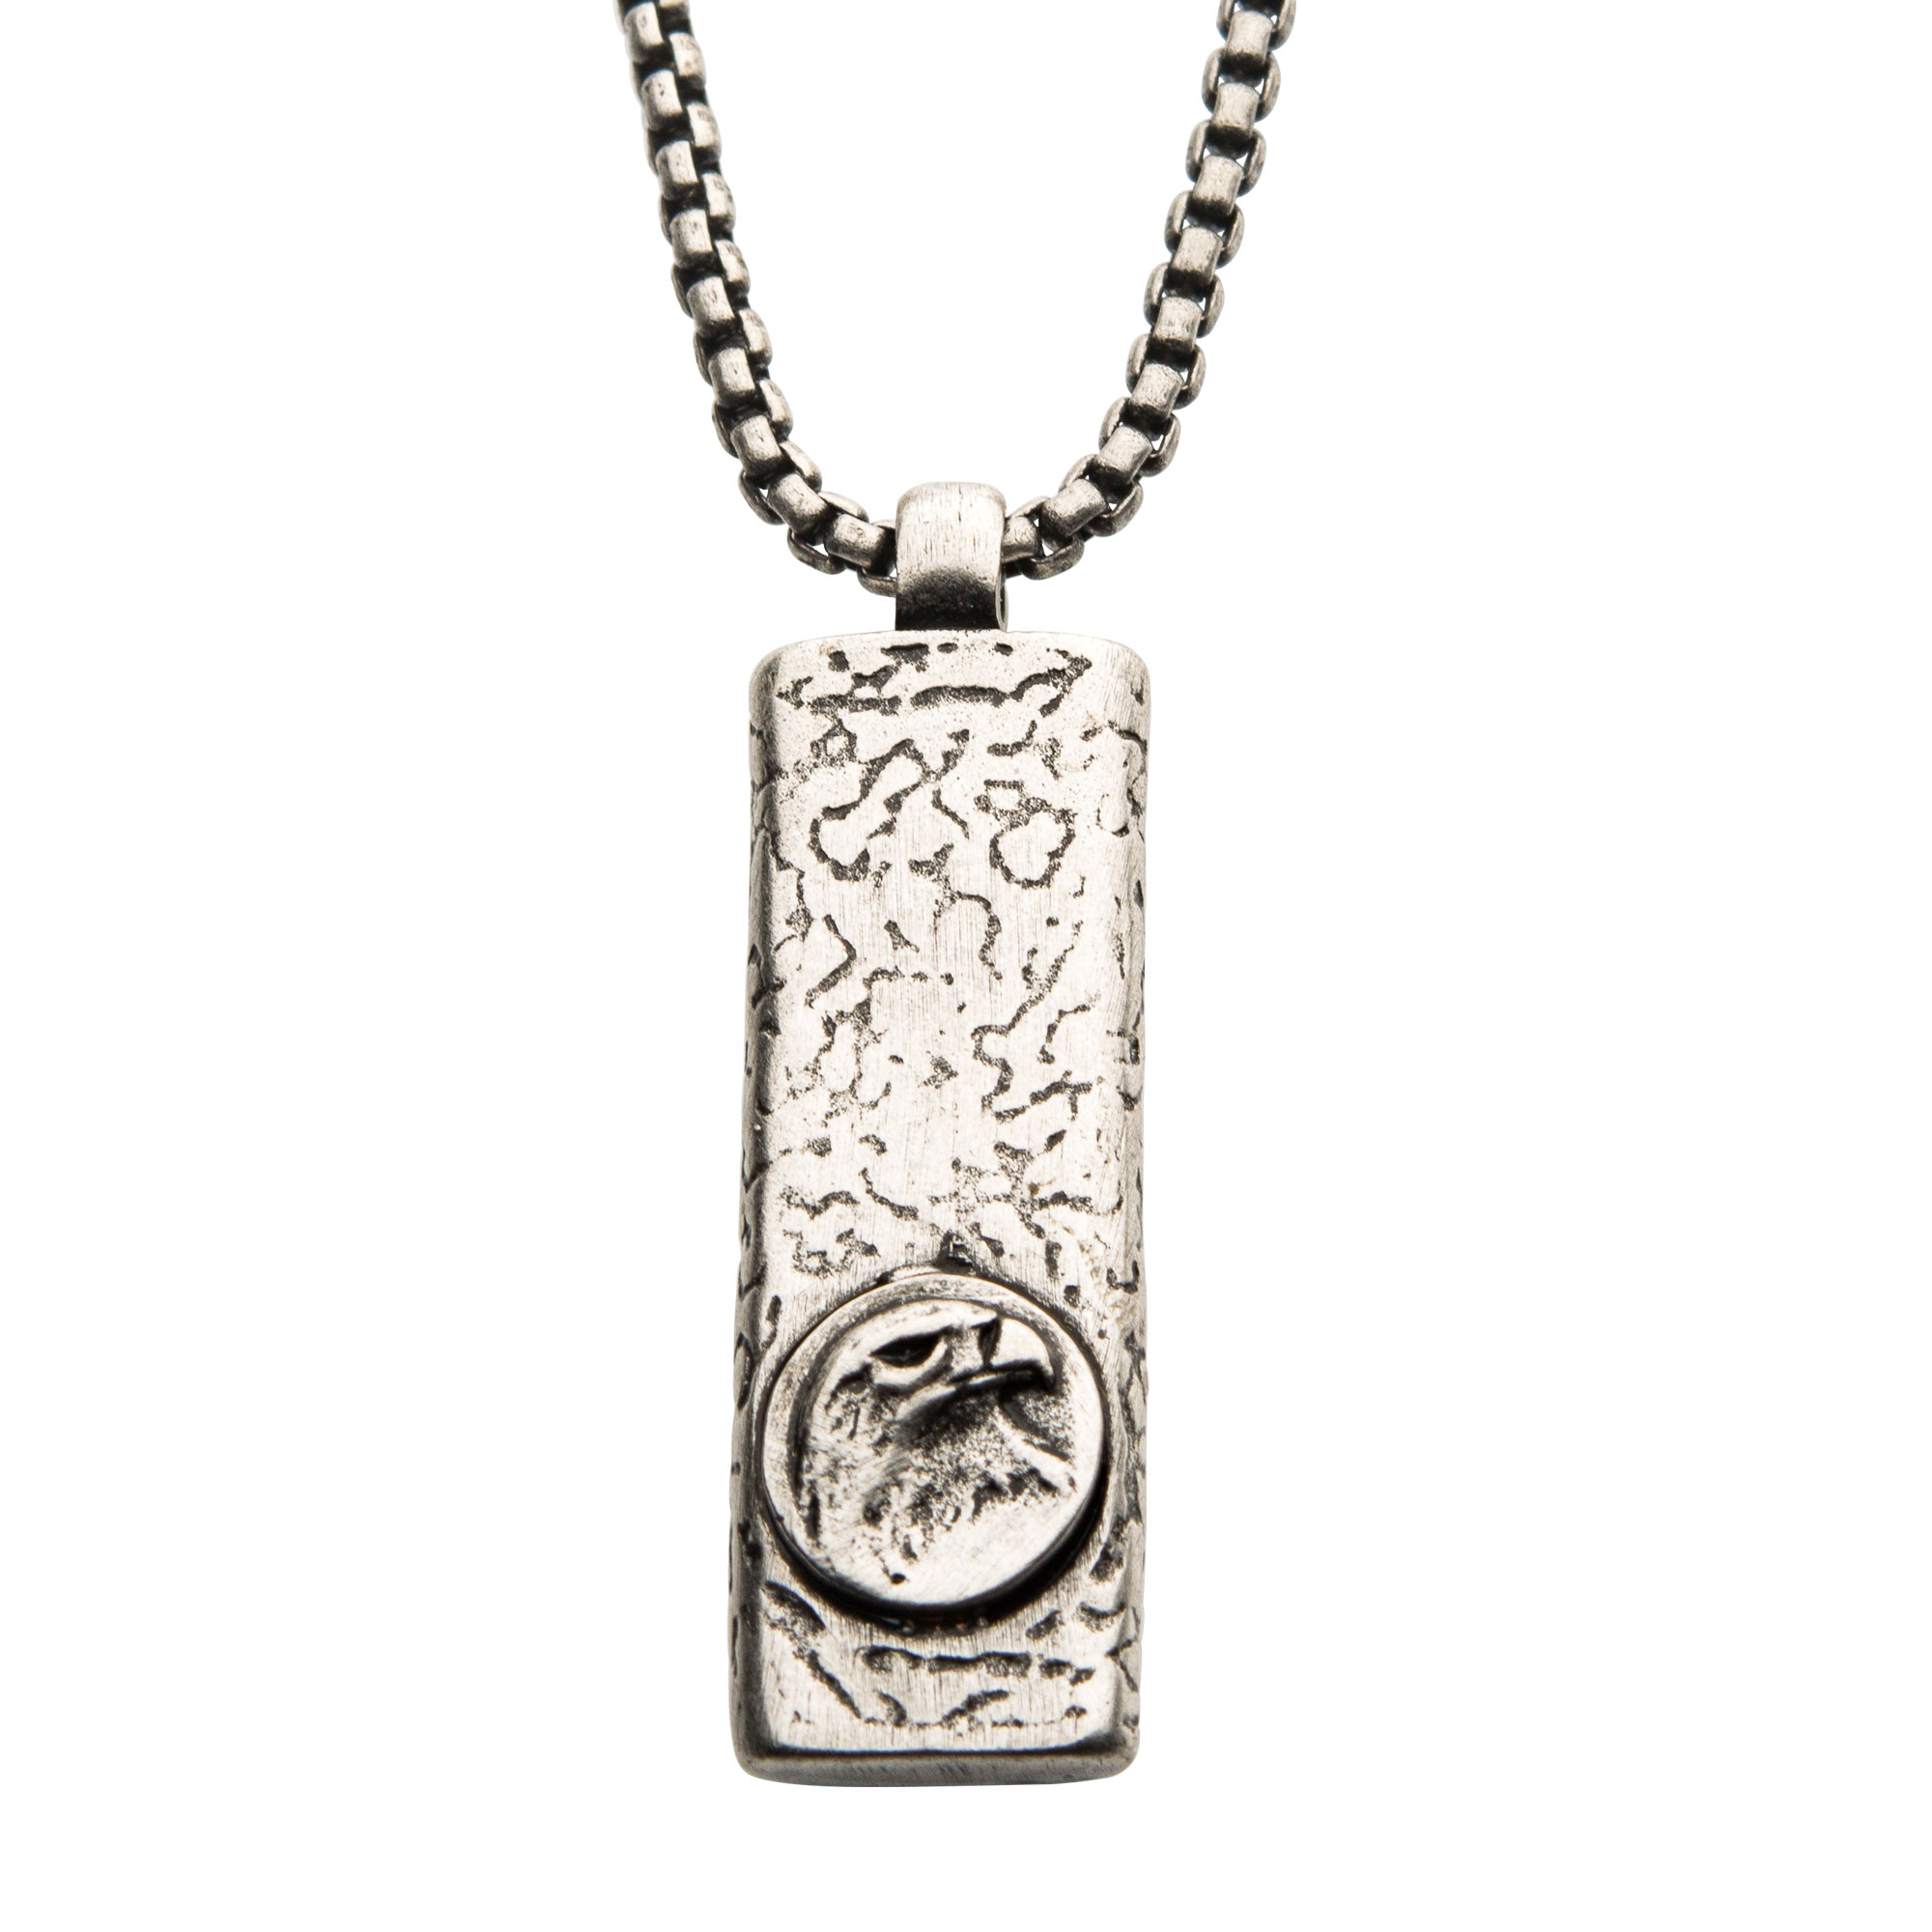 Stainless Steel Silver Plated Dog Tag Pendant with Eagle Head Inlay, with Steel Box Chain Thurber's Fine Jewelry Wadsworth, OH